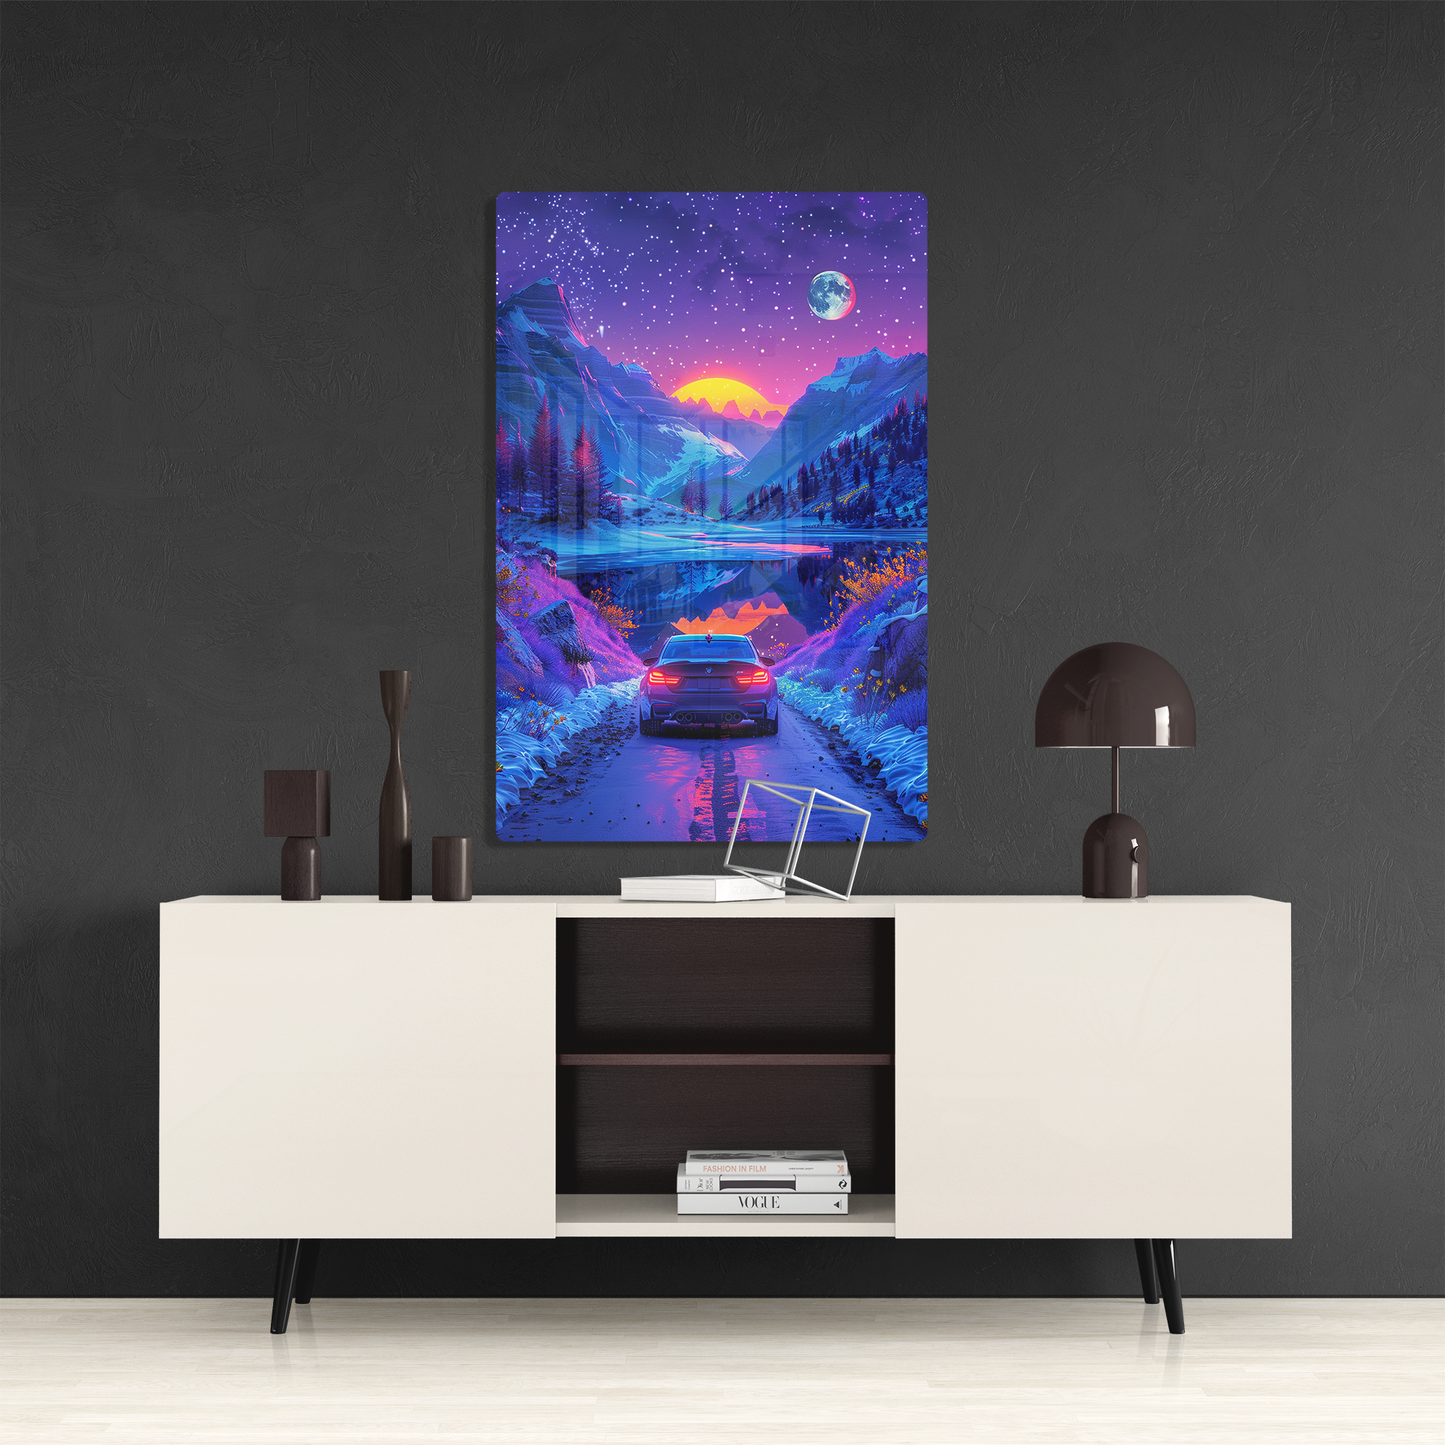 Celestial Drive (Acrylic)Step into the universe with 'Celestial Drive' on Acrylic from RimaGallery. Experience the cosmos in your home with vibrant, ethically crafted art. Free shipping in tRimaGallery